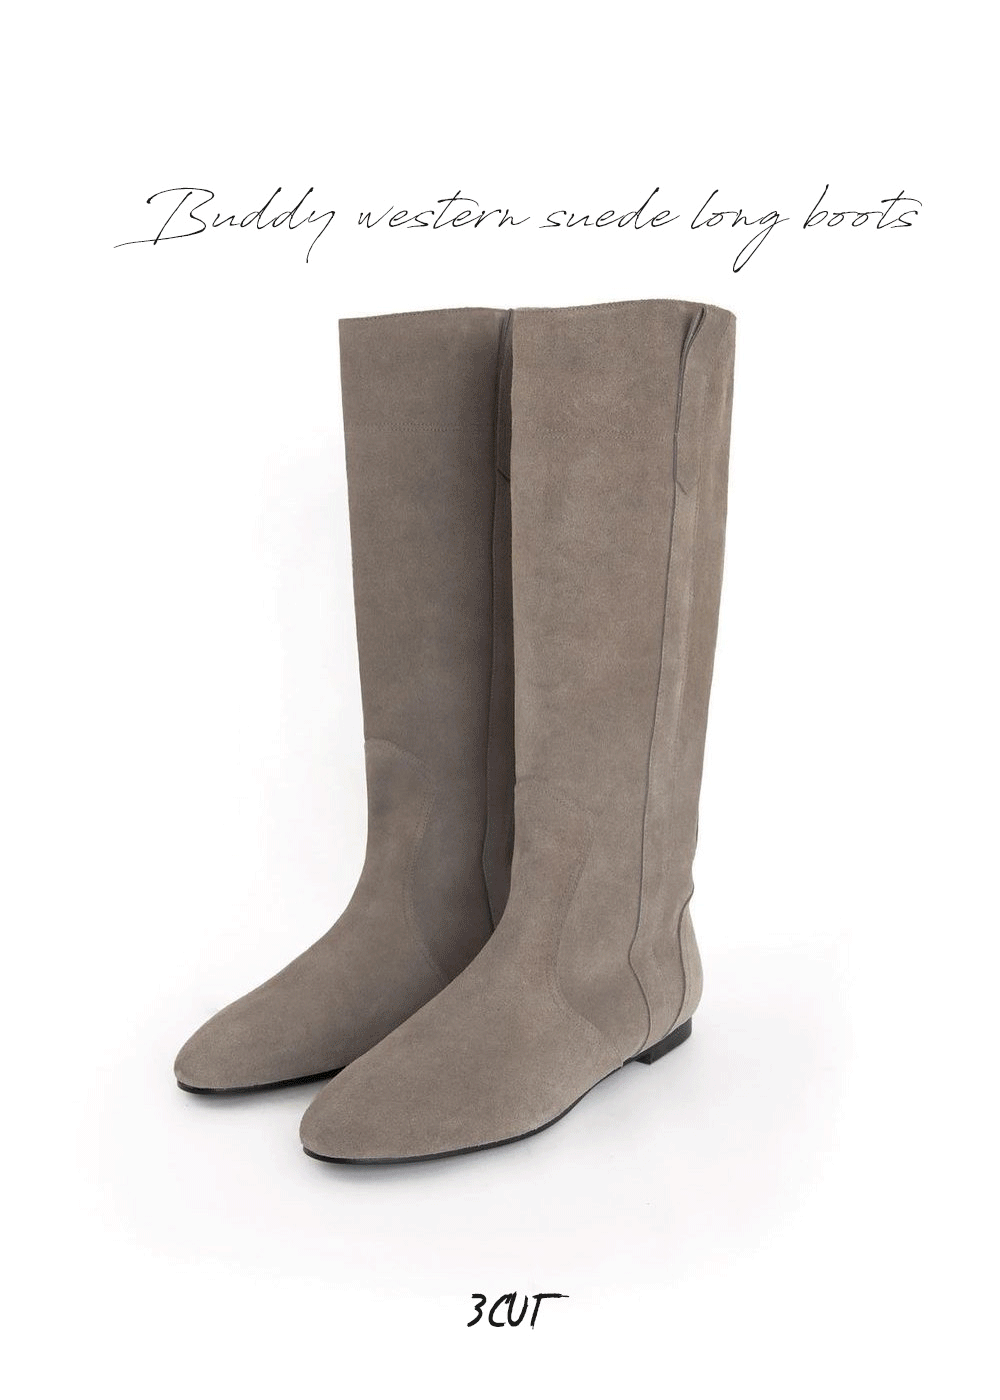 Buddy western suede long boots